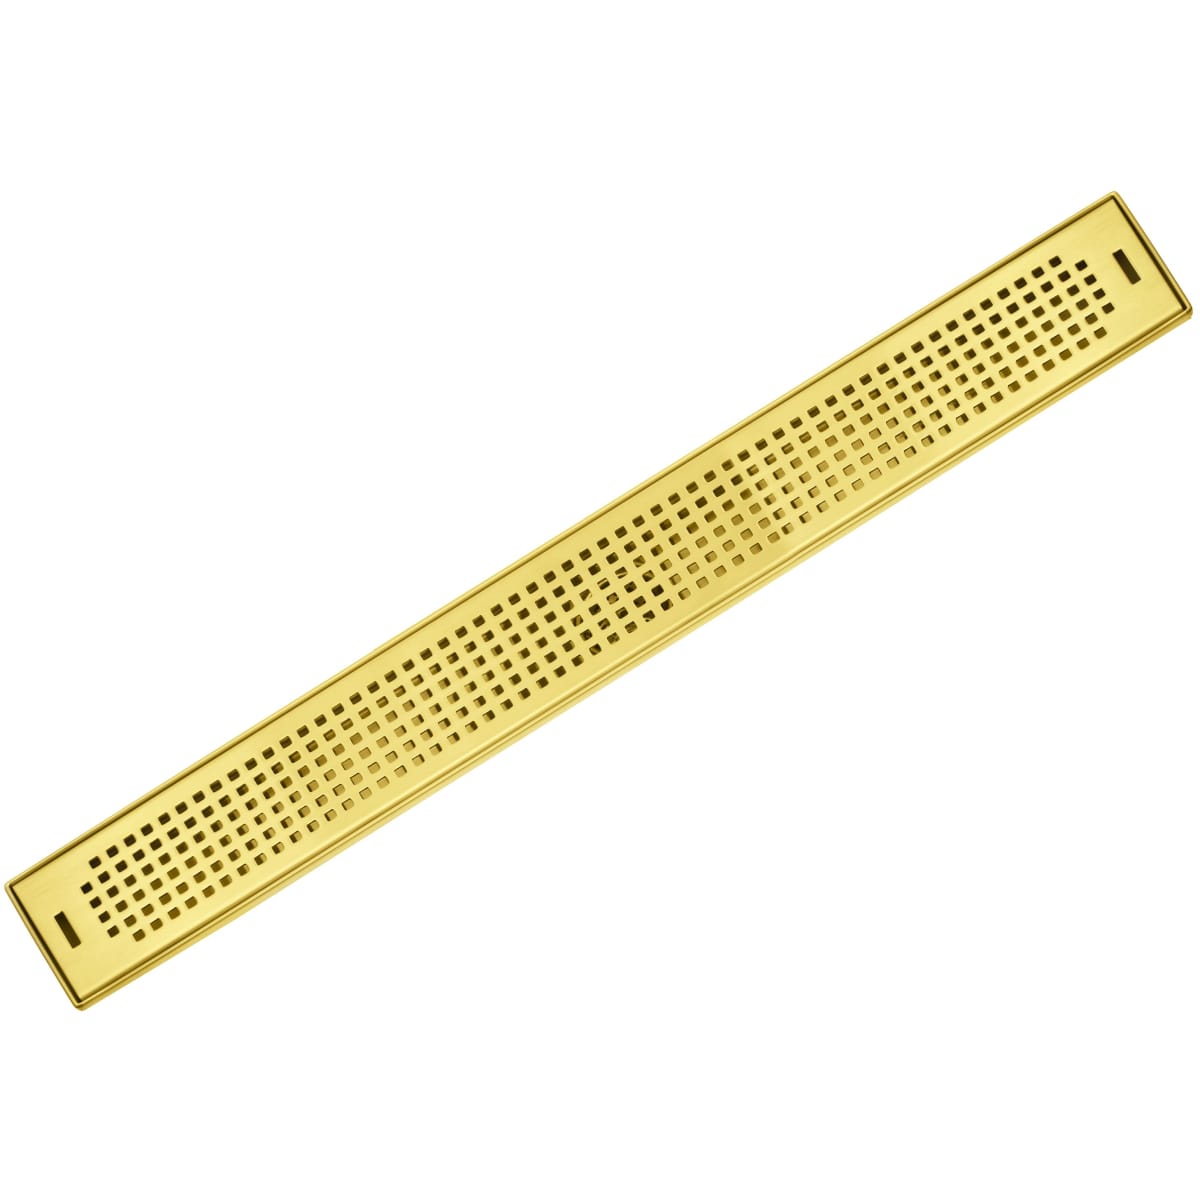 LUXE Linear Drains SP-36-CH 36 Square Pattern Grate